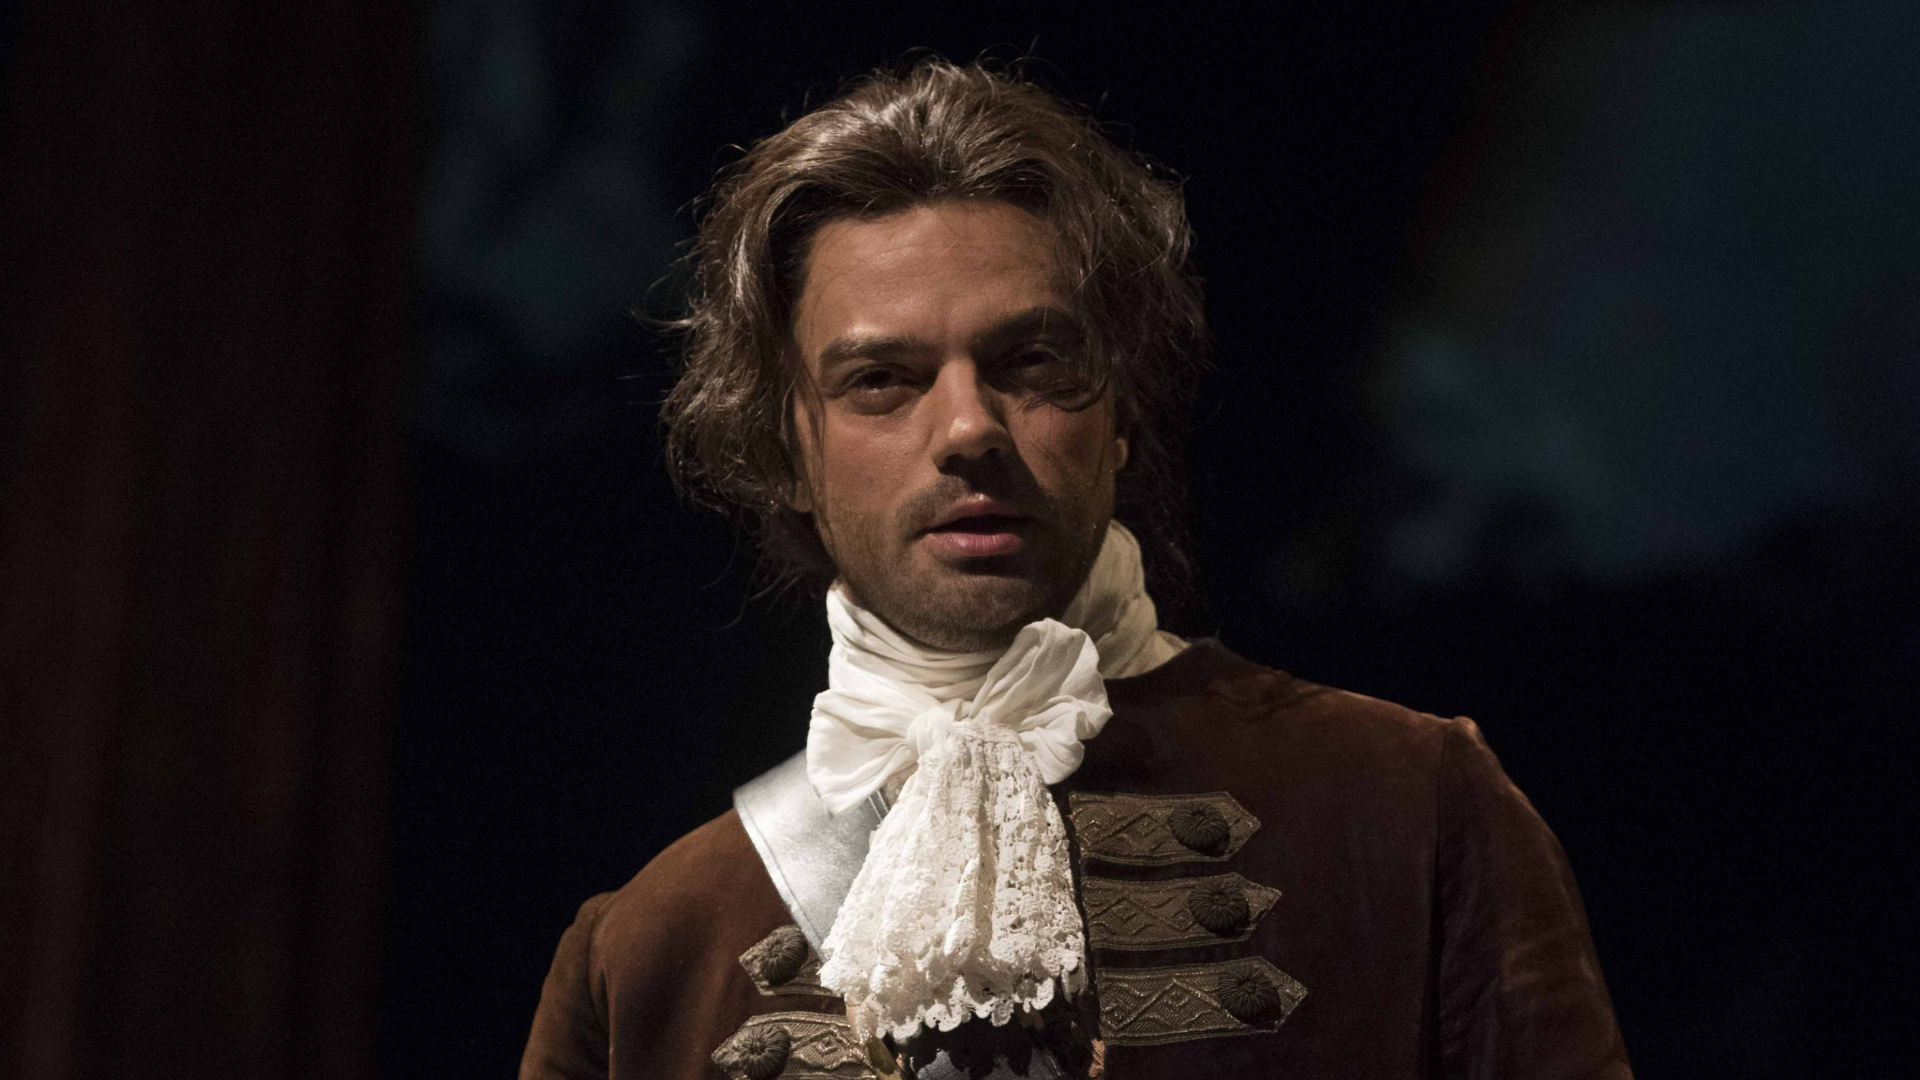 Dominic Cooper, The Libertine review, West End star, Variety, 1920x1080 Full HD Desktop